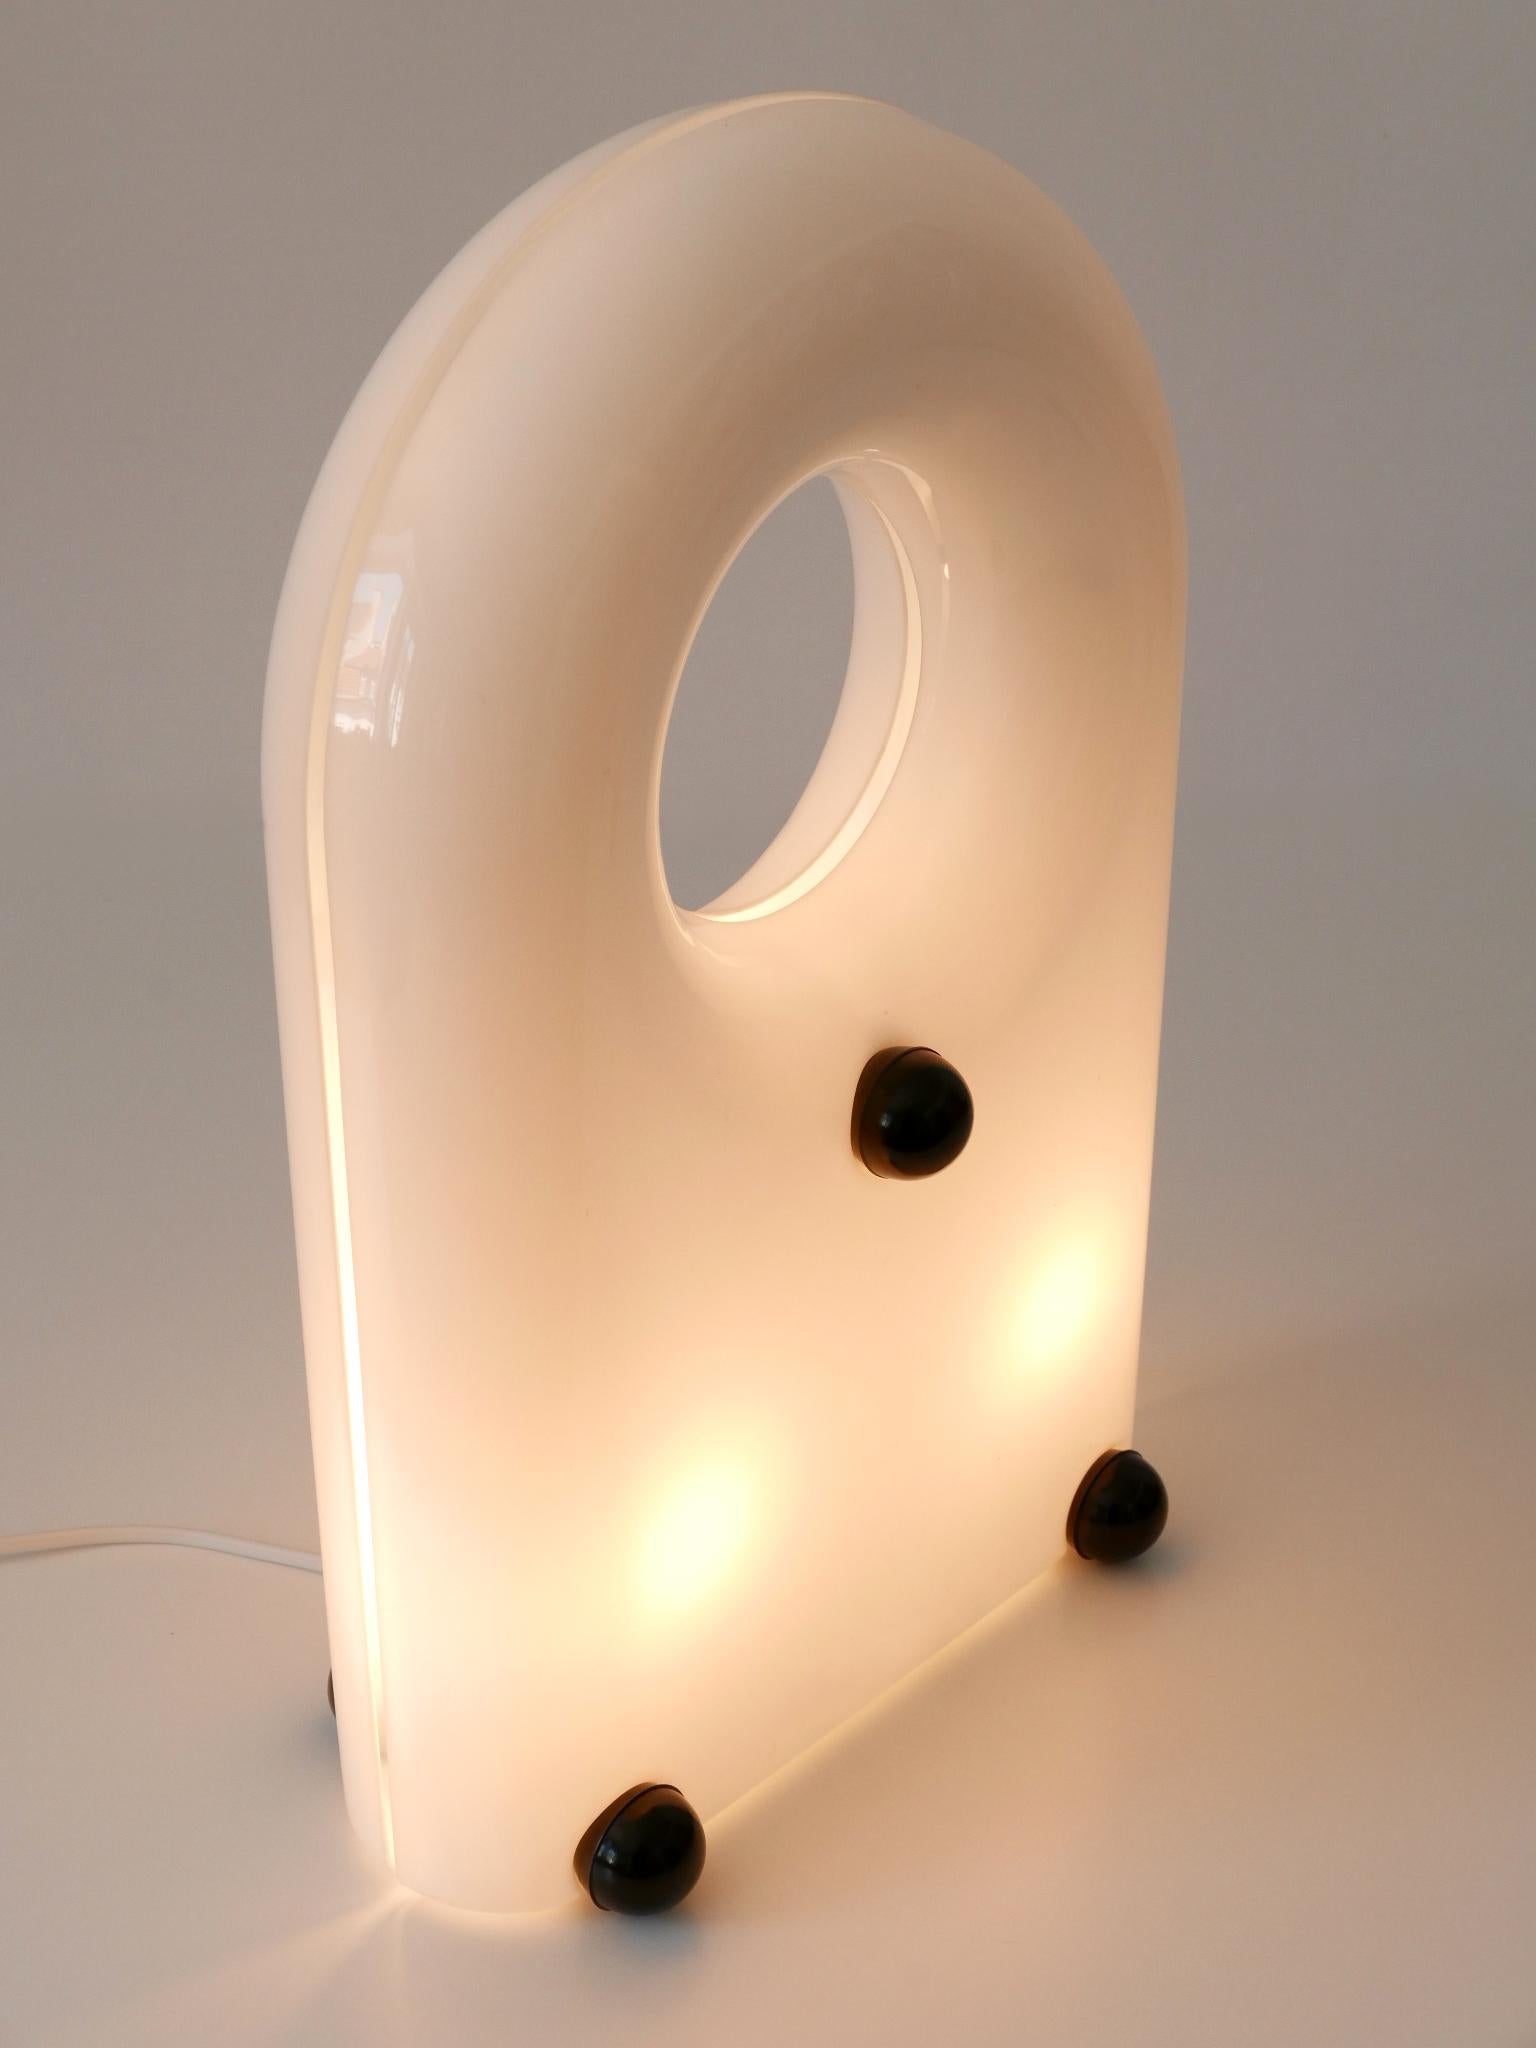 Italian Extremely Rare Lucite Table Lamp or Floor Light by Elio Martinelli 1969 Italy For Sale